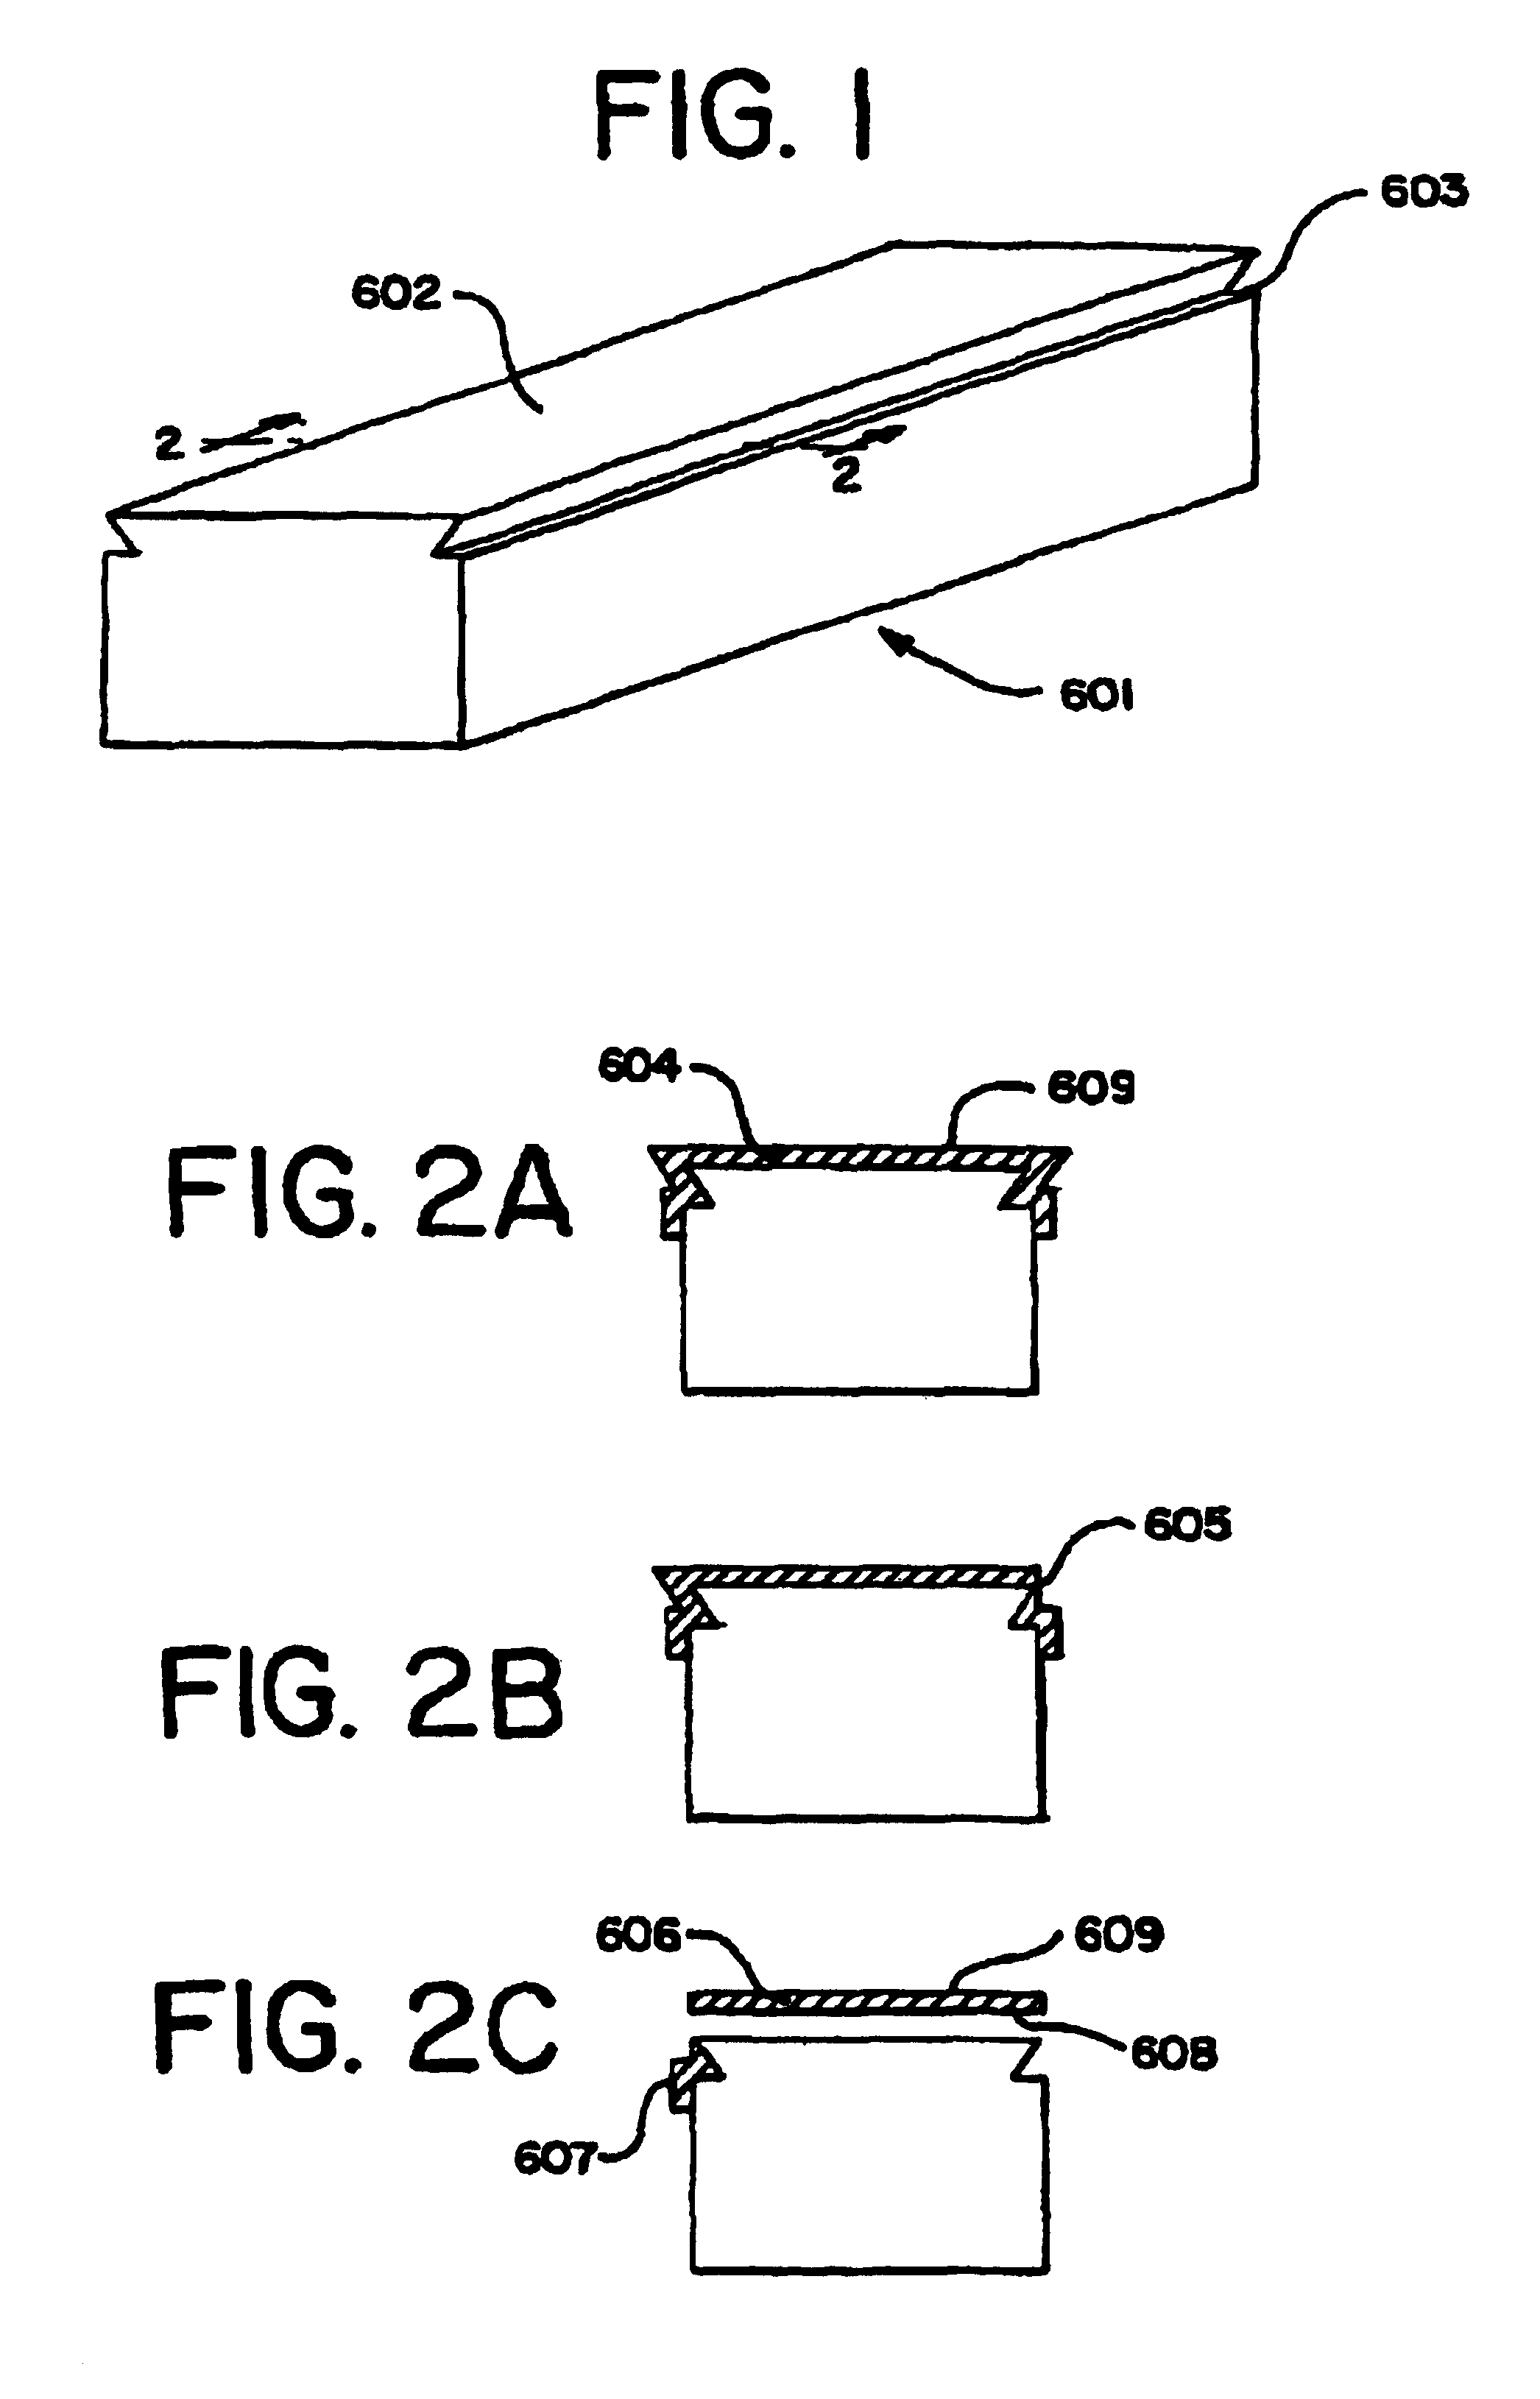 Retroreflective articles having microcubes, and tools and methods for forming microcubes